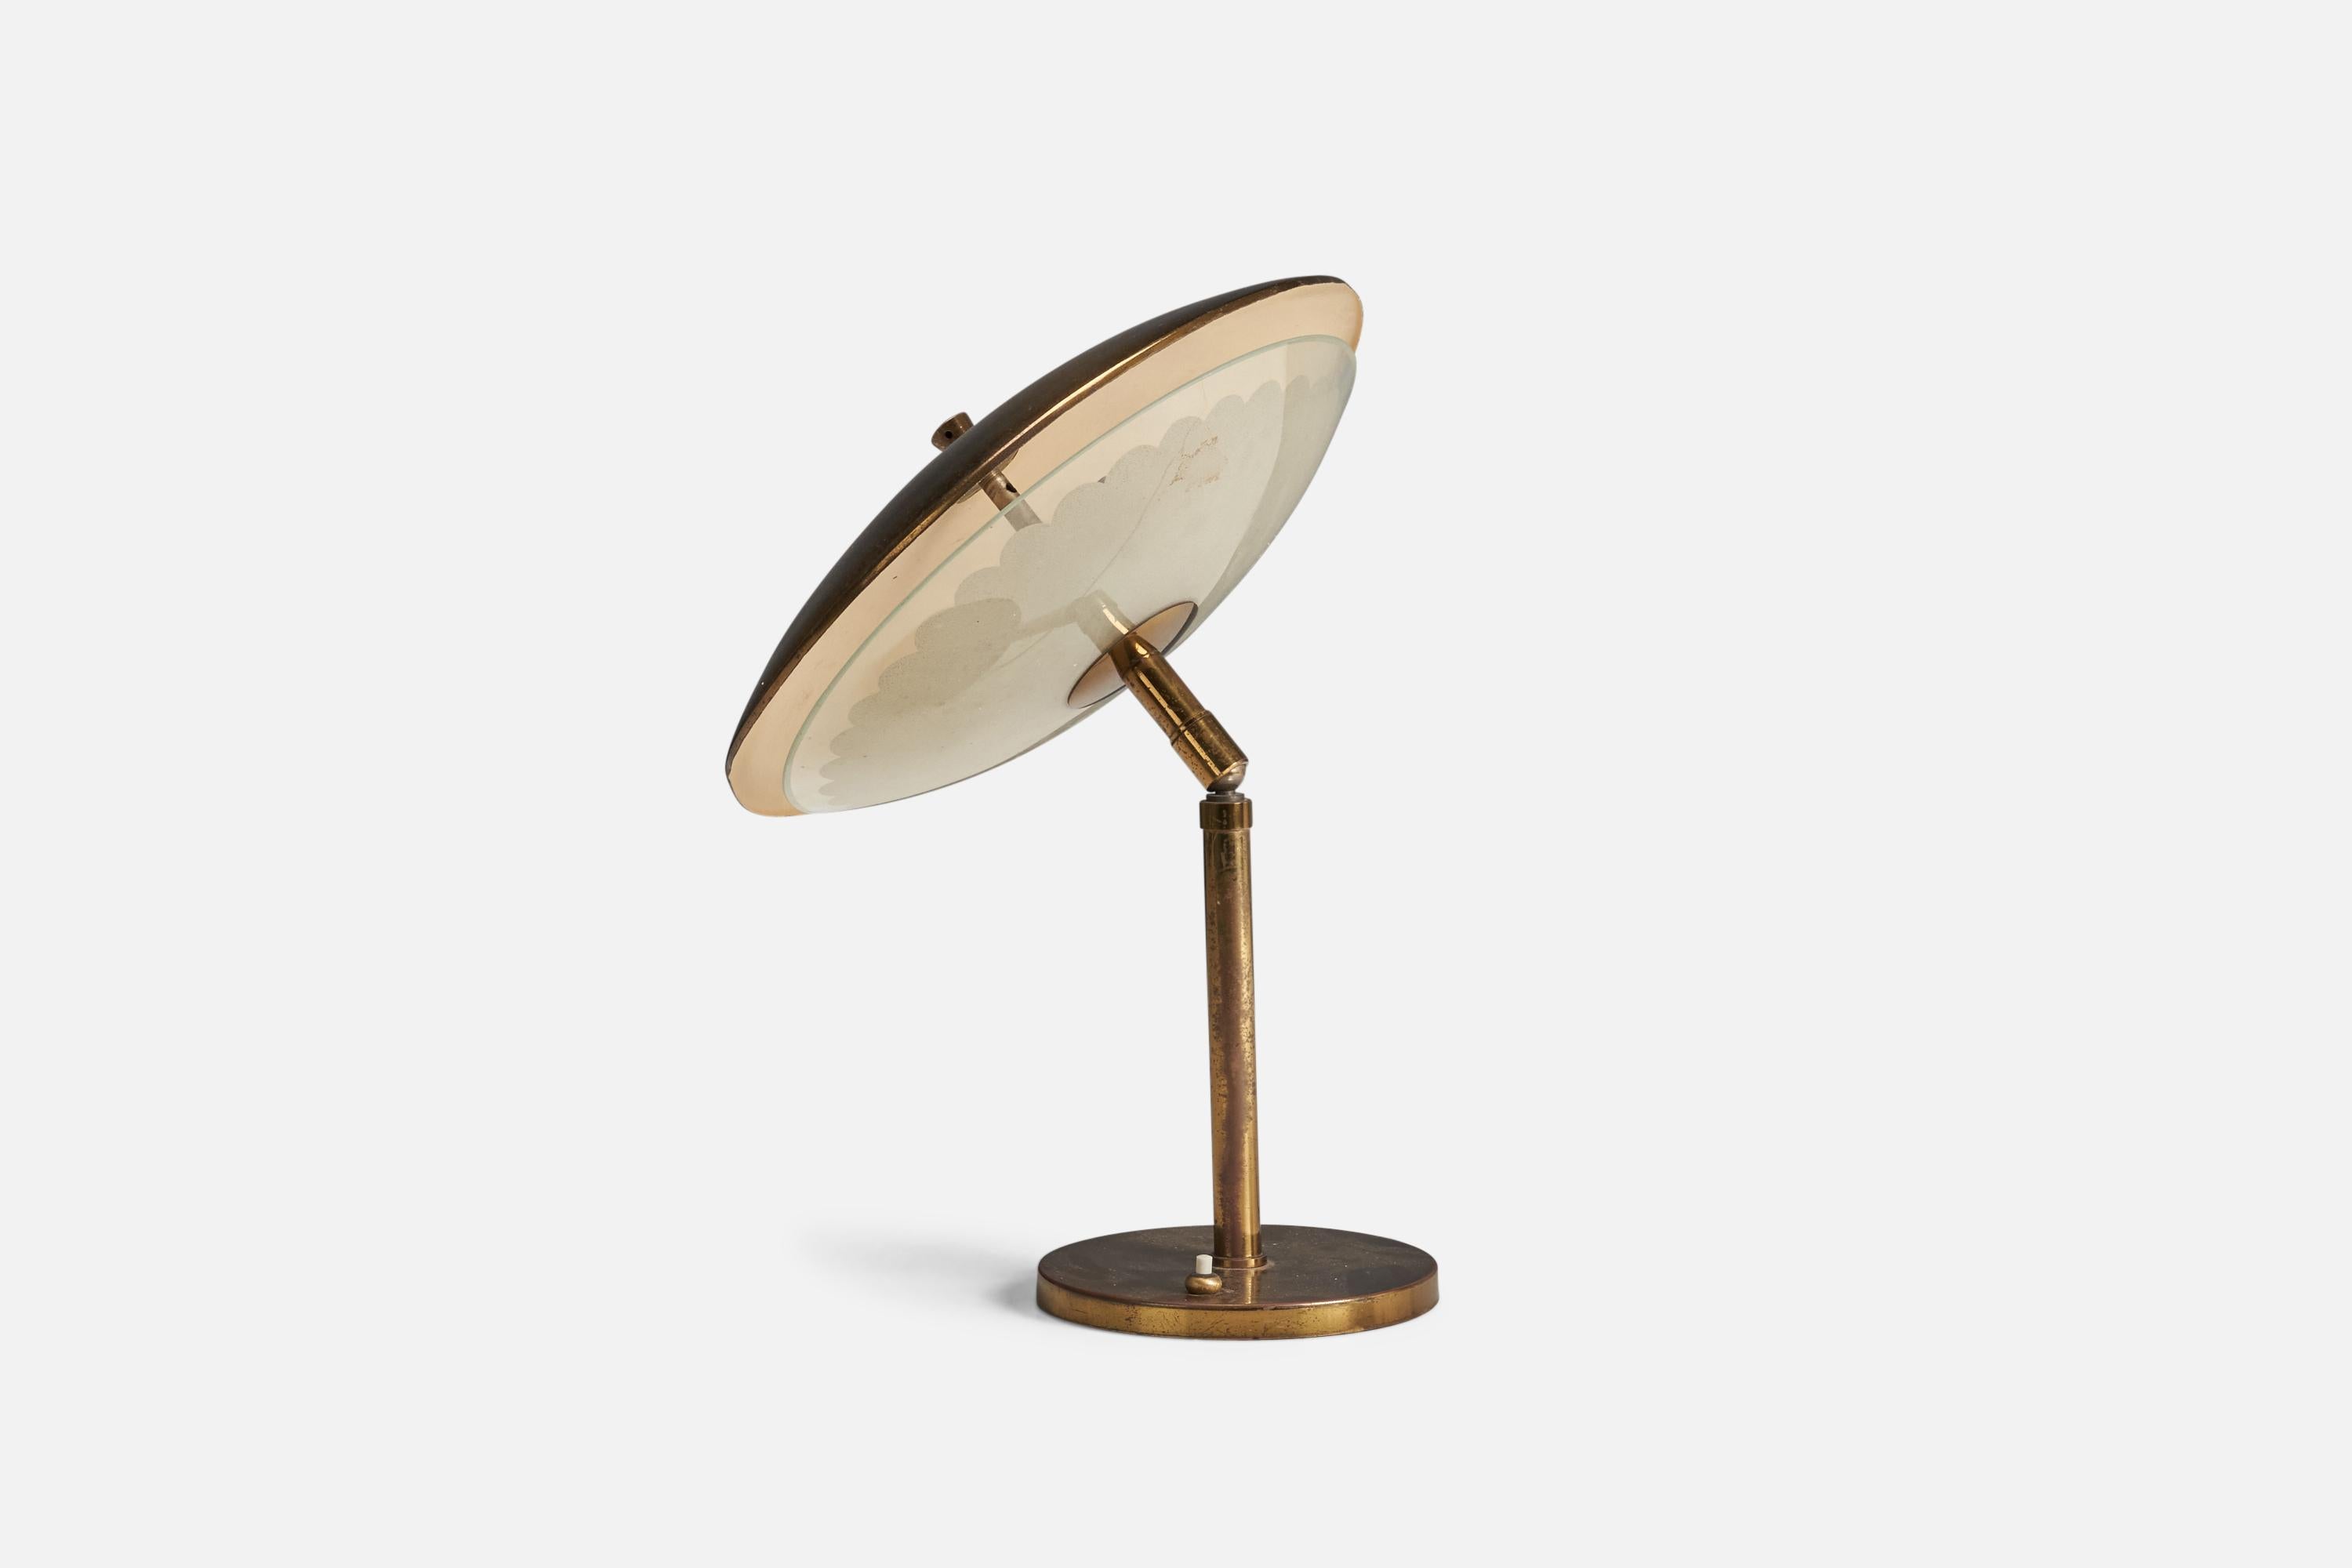 An adjustable glass and brass table lamp designed and produced by an Italian Designer, Italy, 1940s.

Dimensions variable, measured as illustrated in upright position.

Sockets take E-14 bulbs.

There is no maximum wattage stated on the